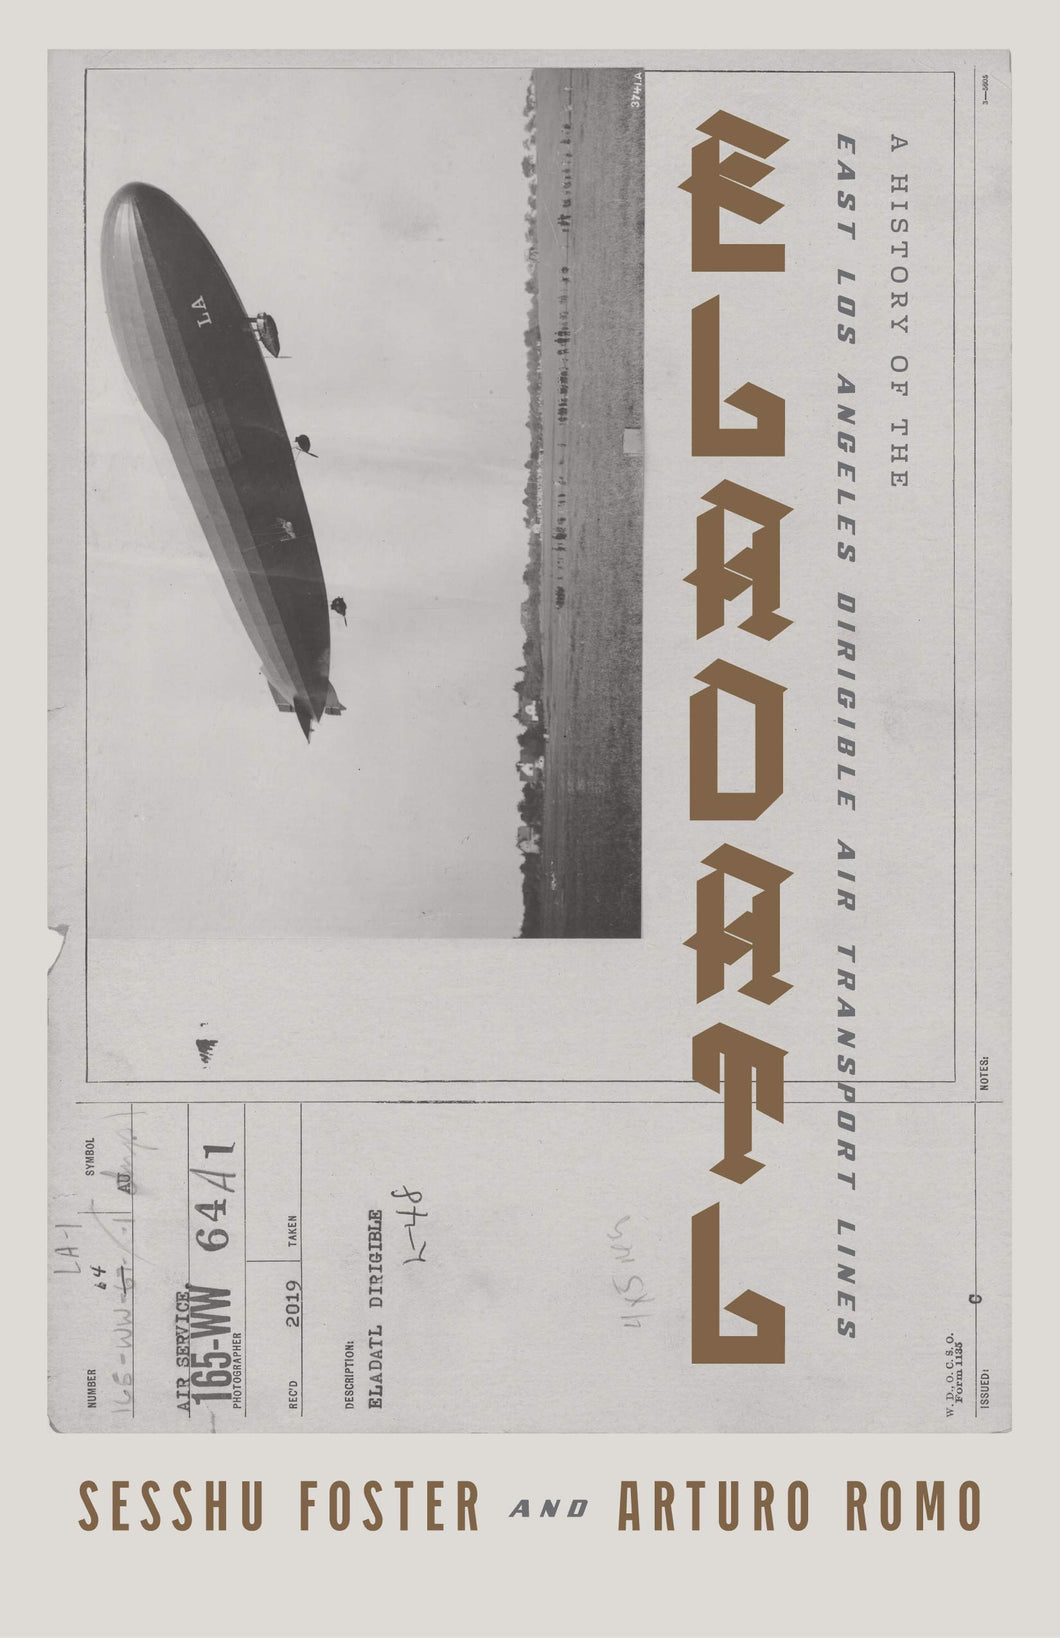 ELADATL: A History of the East Los Angeles Dirigible Air Transport Lines by Sesshu Foster, Arturo Ernesto Romo